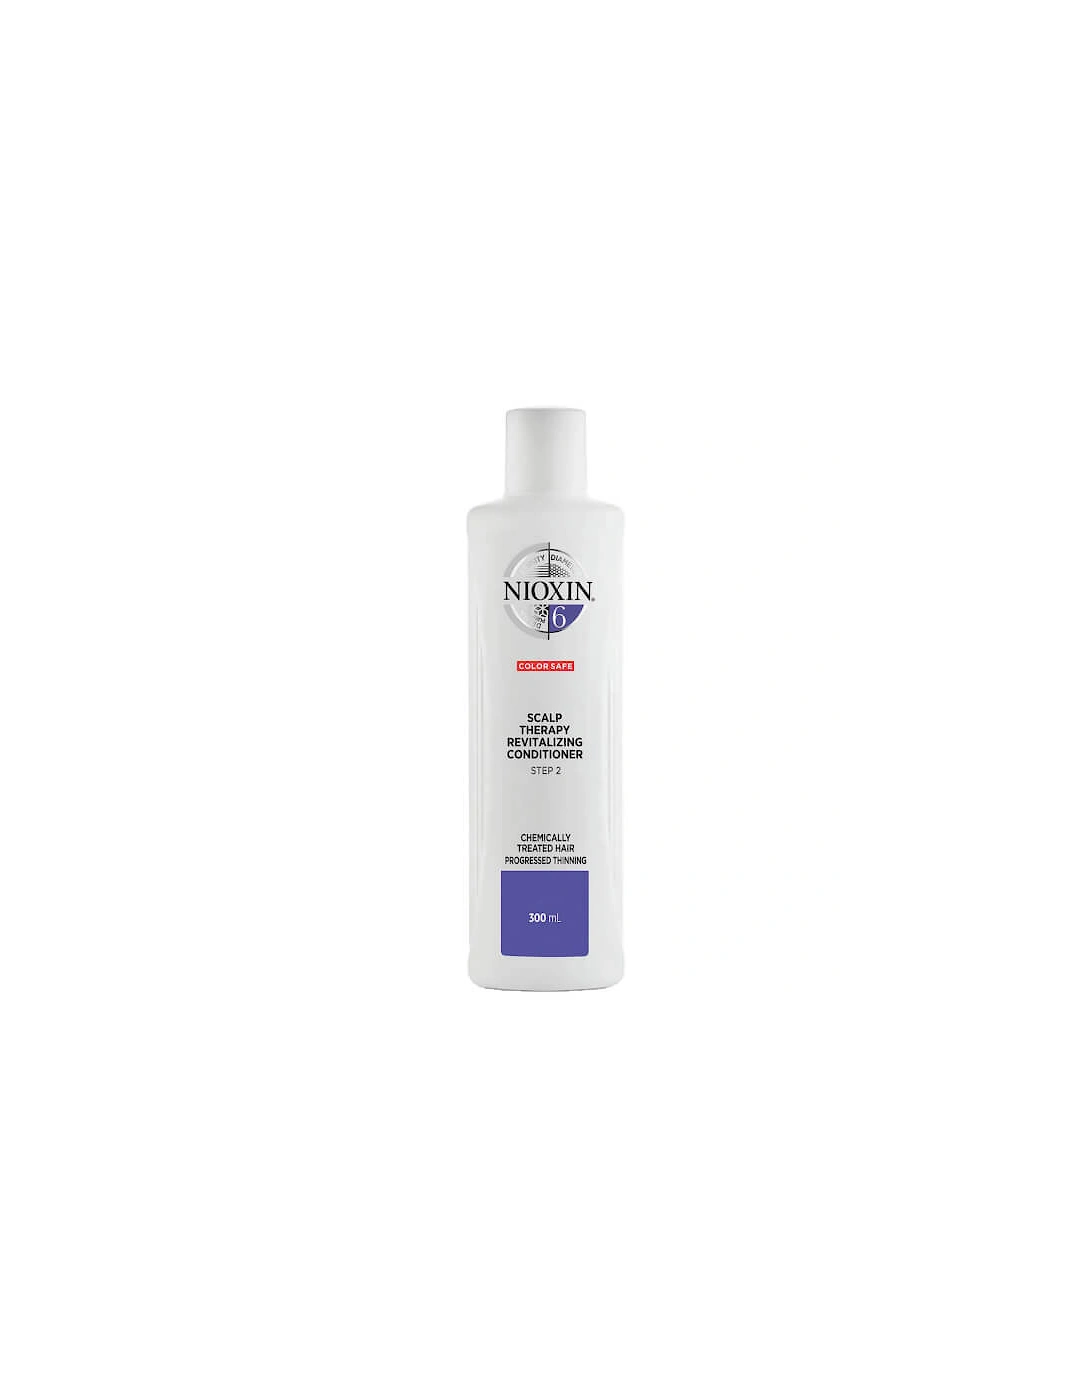 3-Part System 6 Scalp Therapy Revitalising Conditioner for Chemically Treated Hair with Progressed Thinning 300ml - NIOXIN, 2 of 1